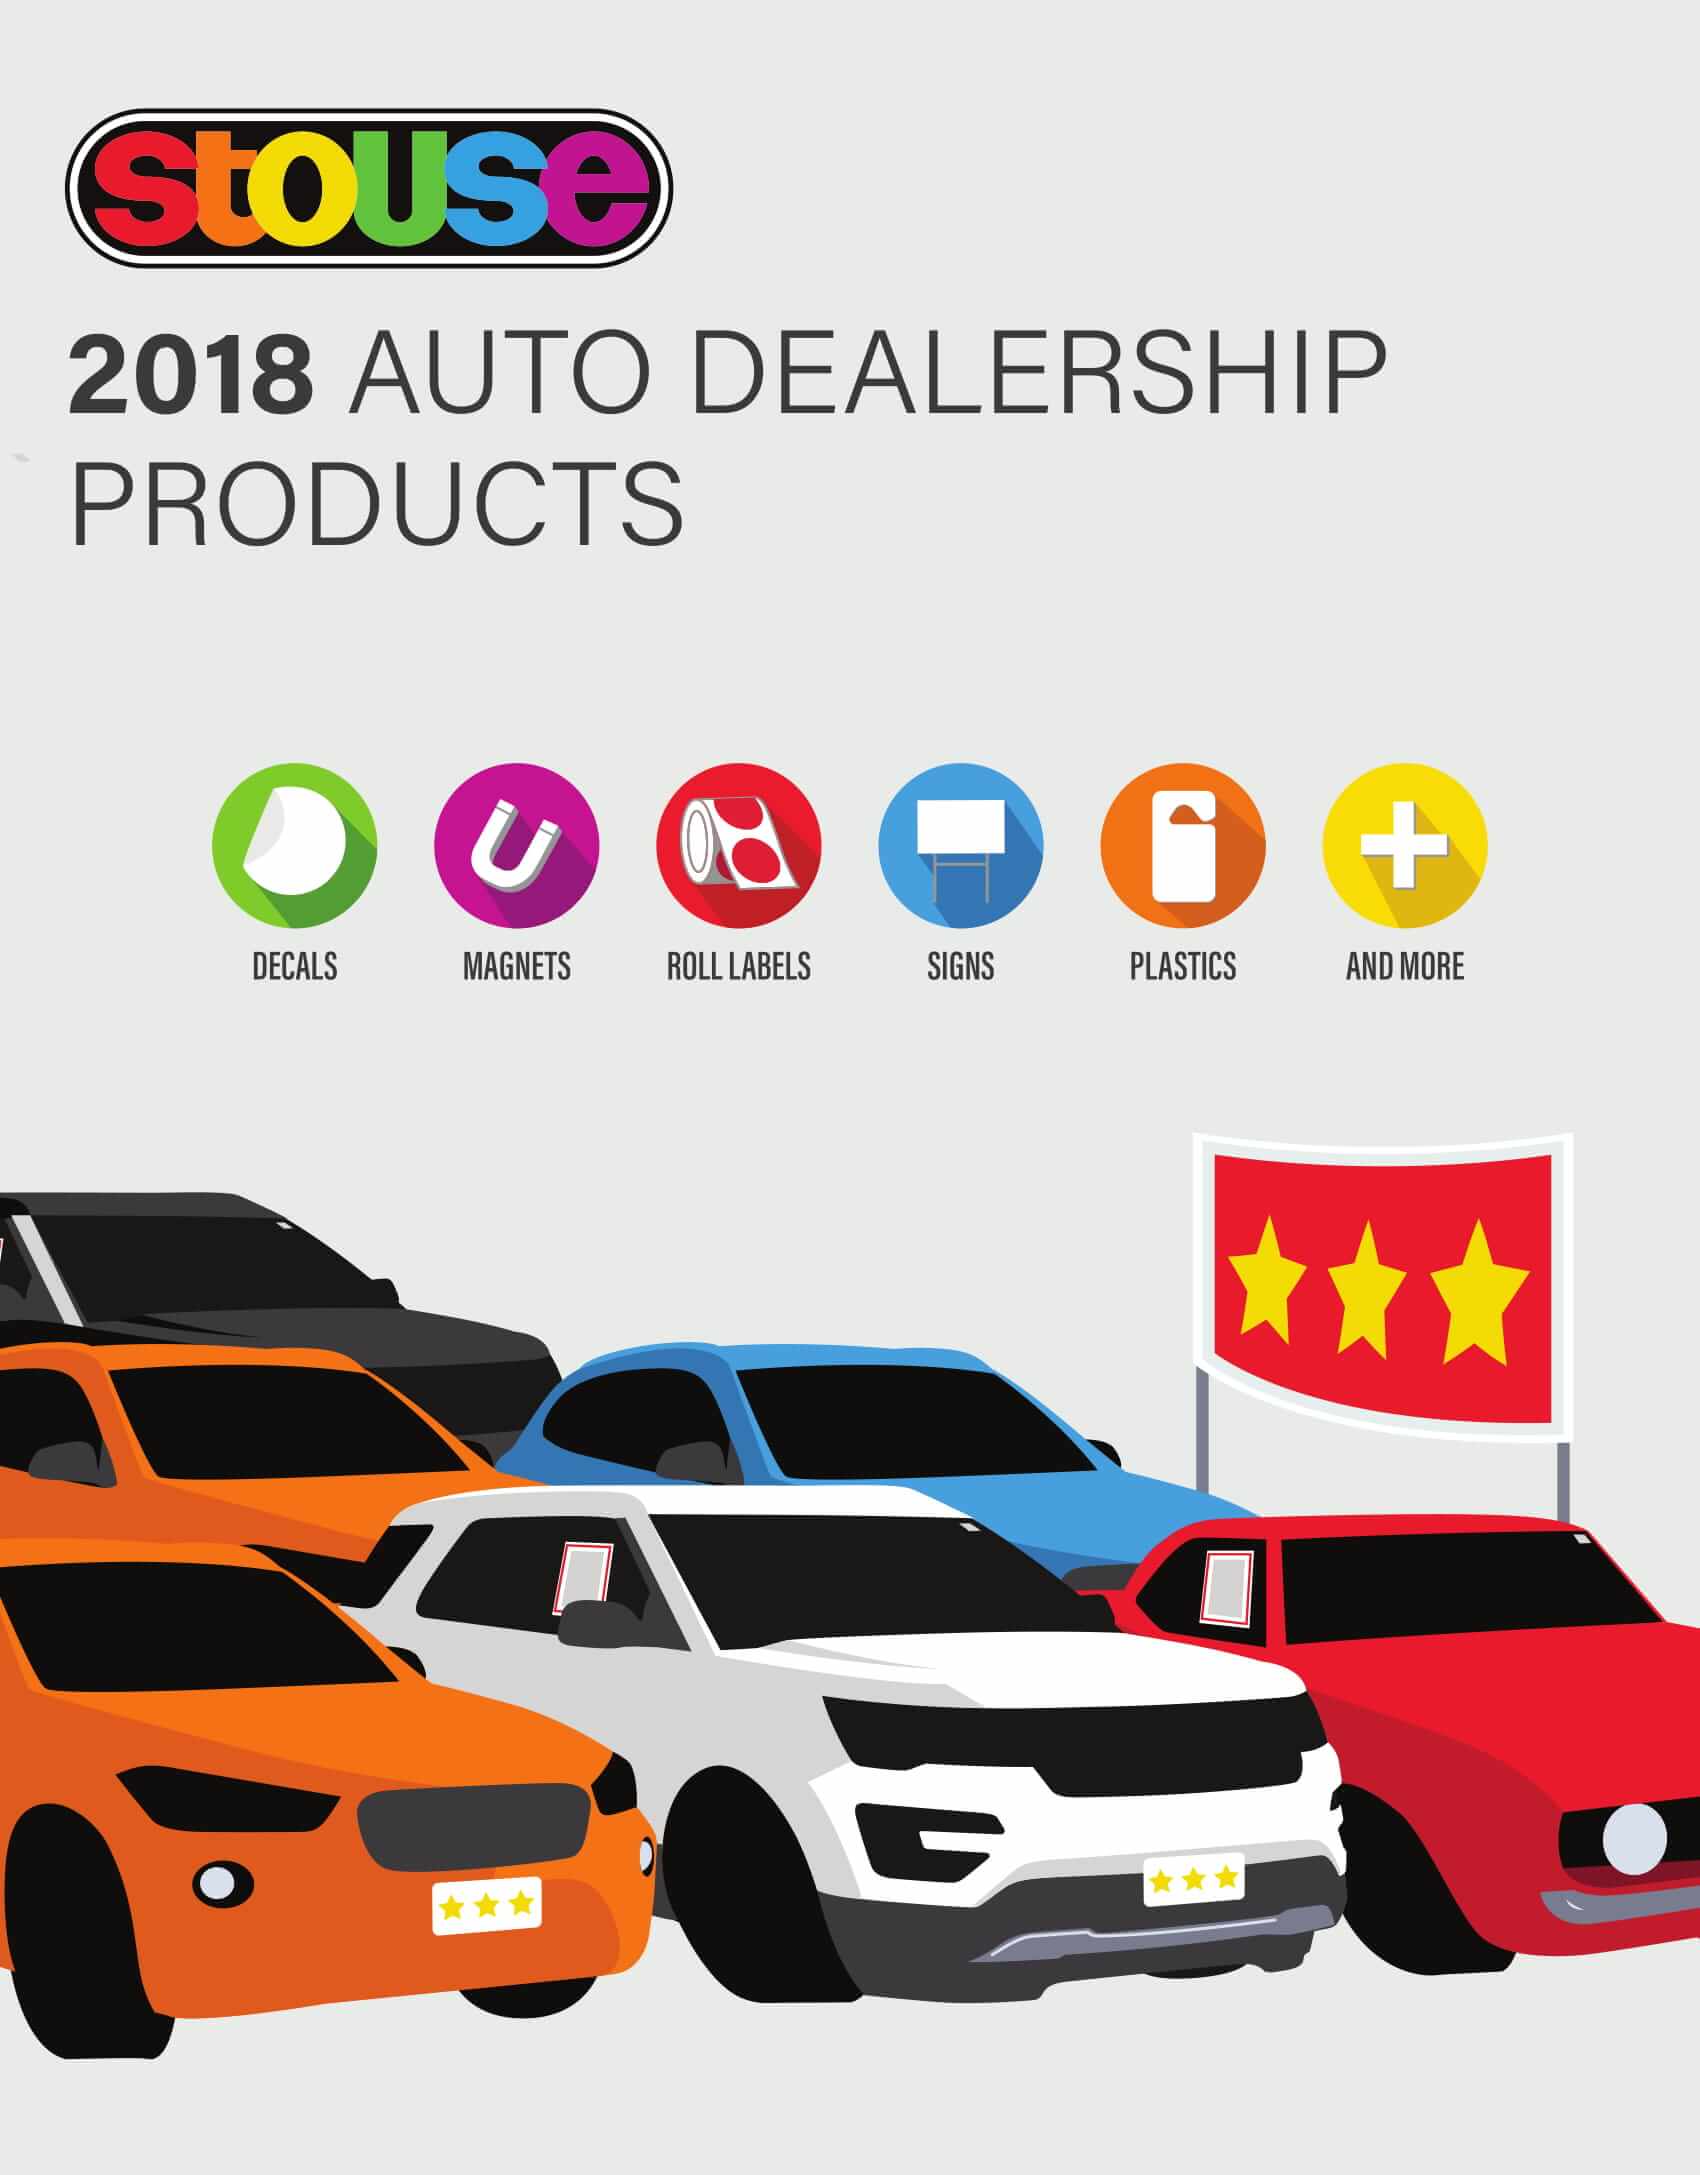 2018 Auto Dealership Products